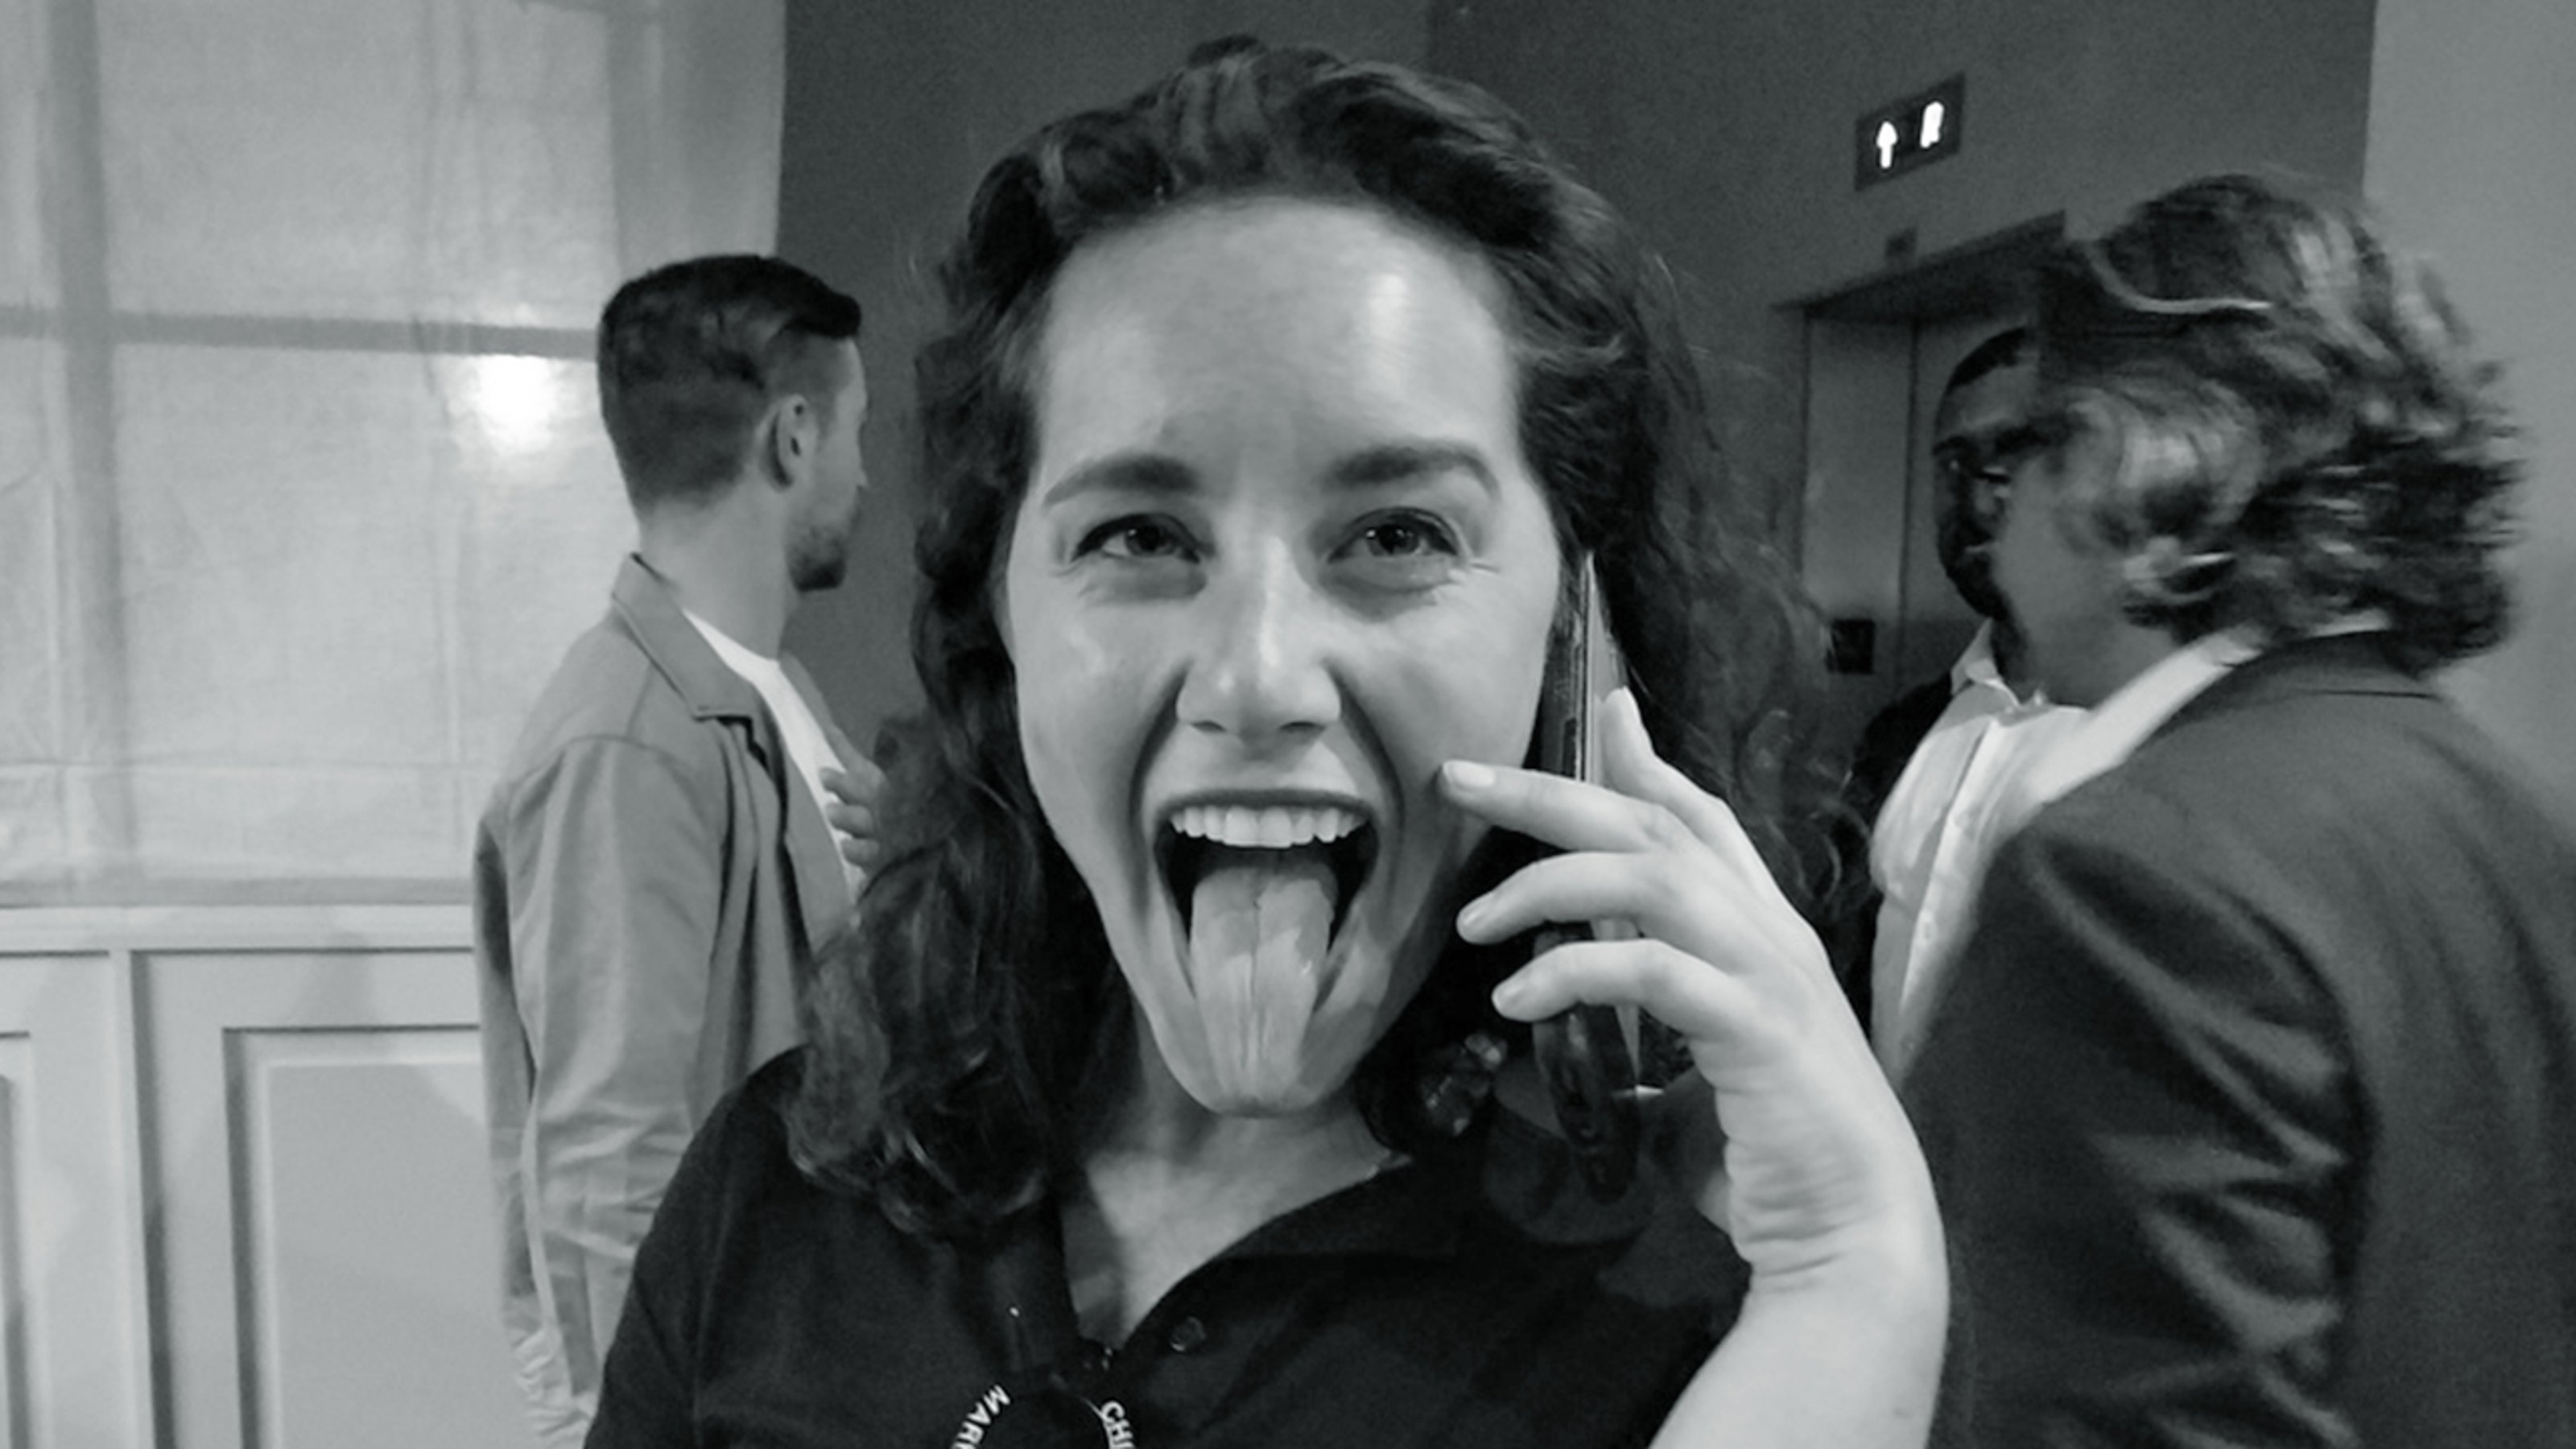 Black and white image of Ellie Rines sticking her tongue out while holding a cellphone to her ear